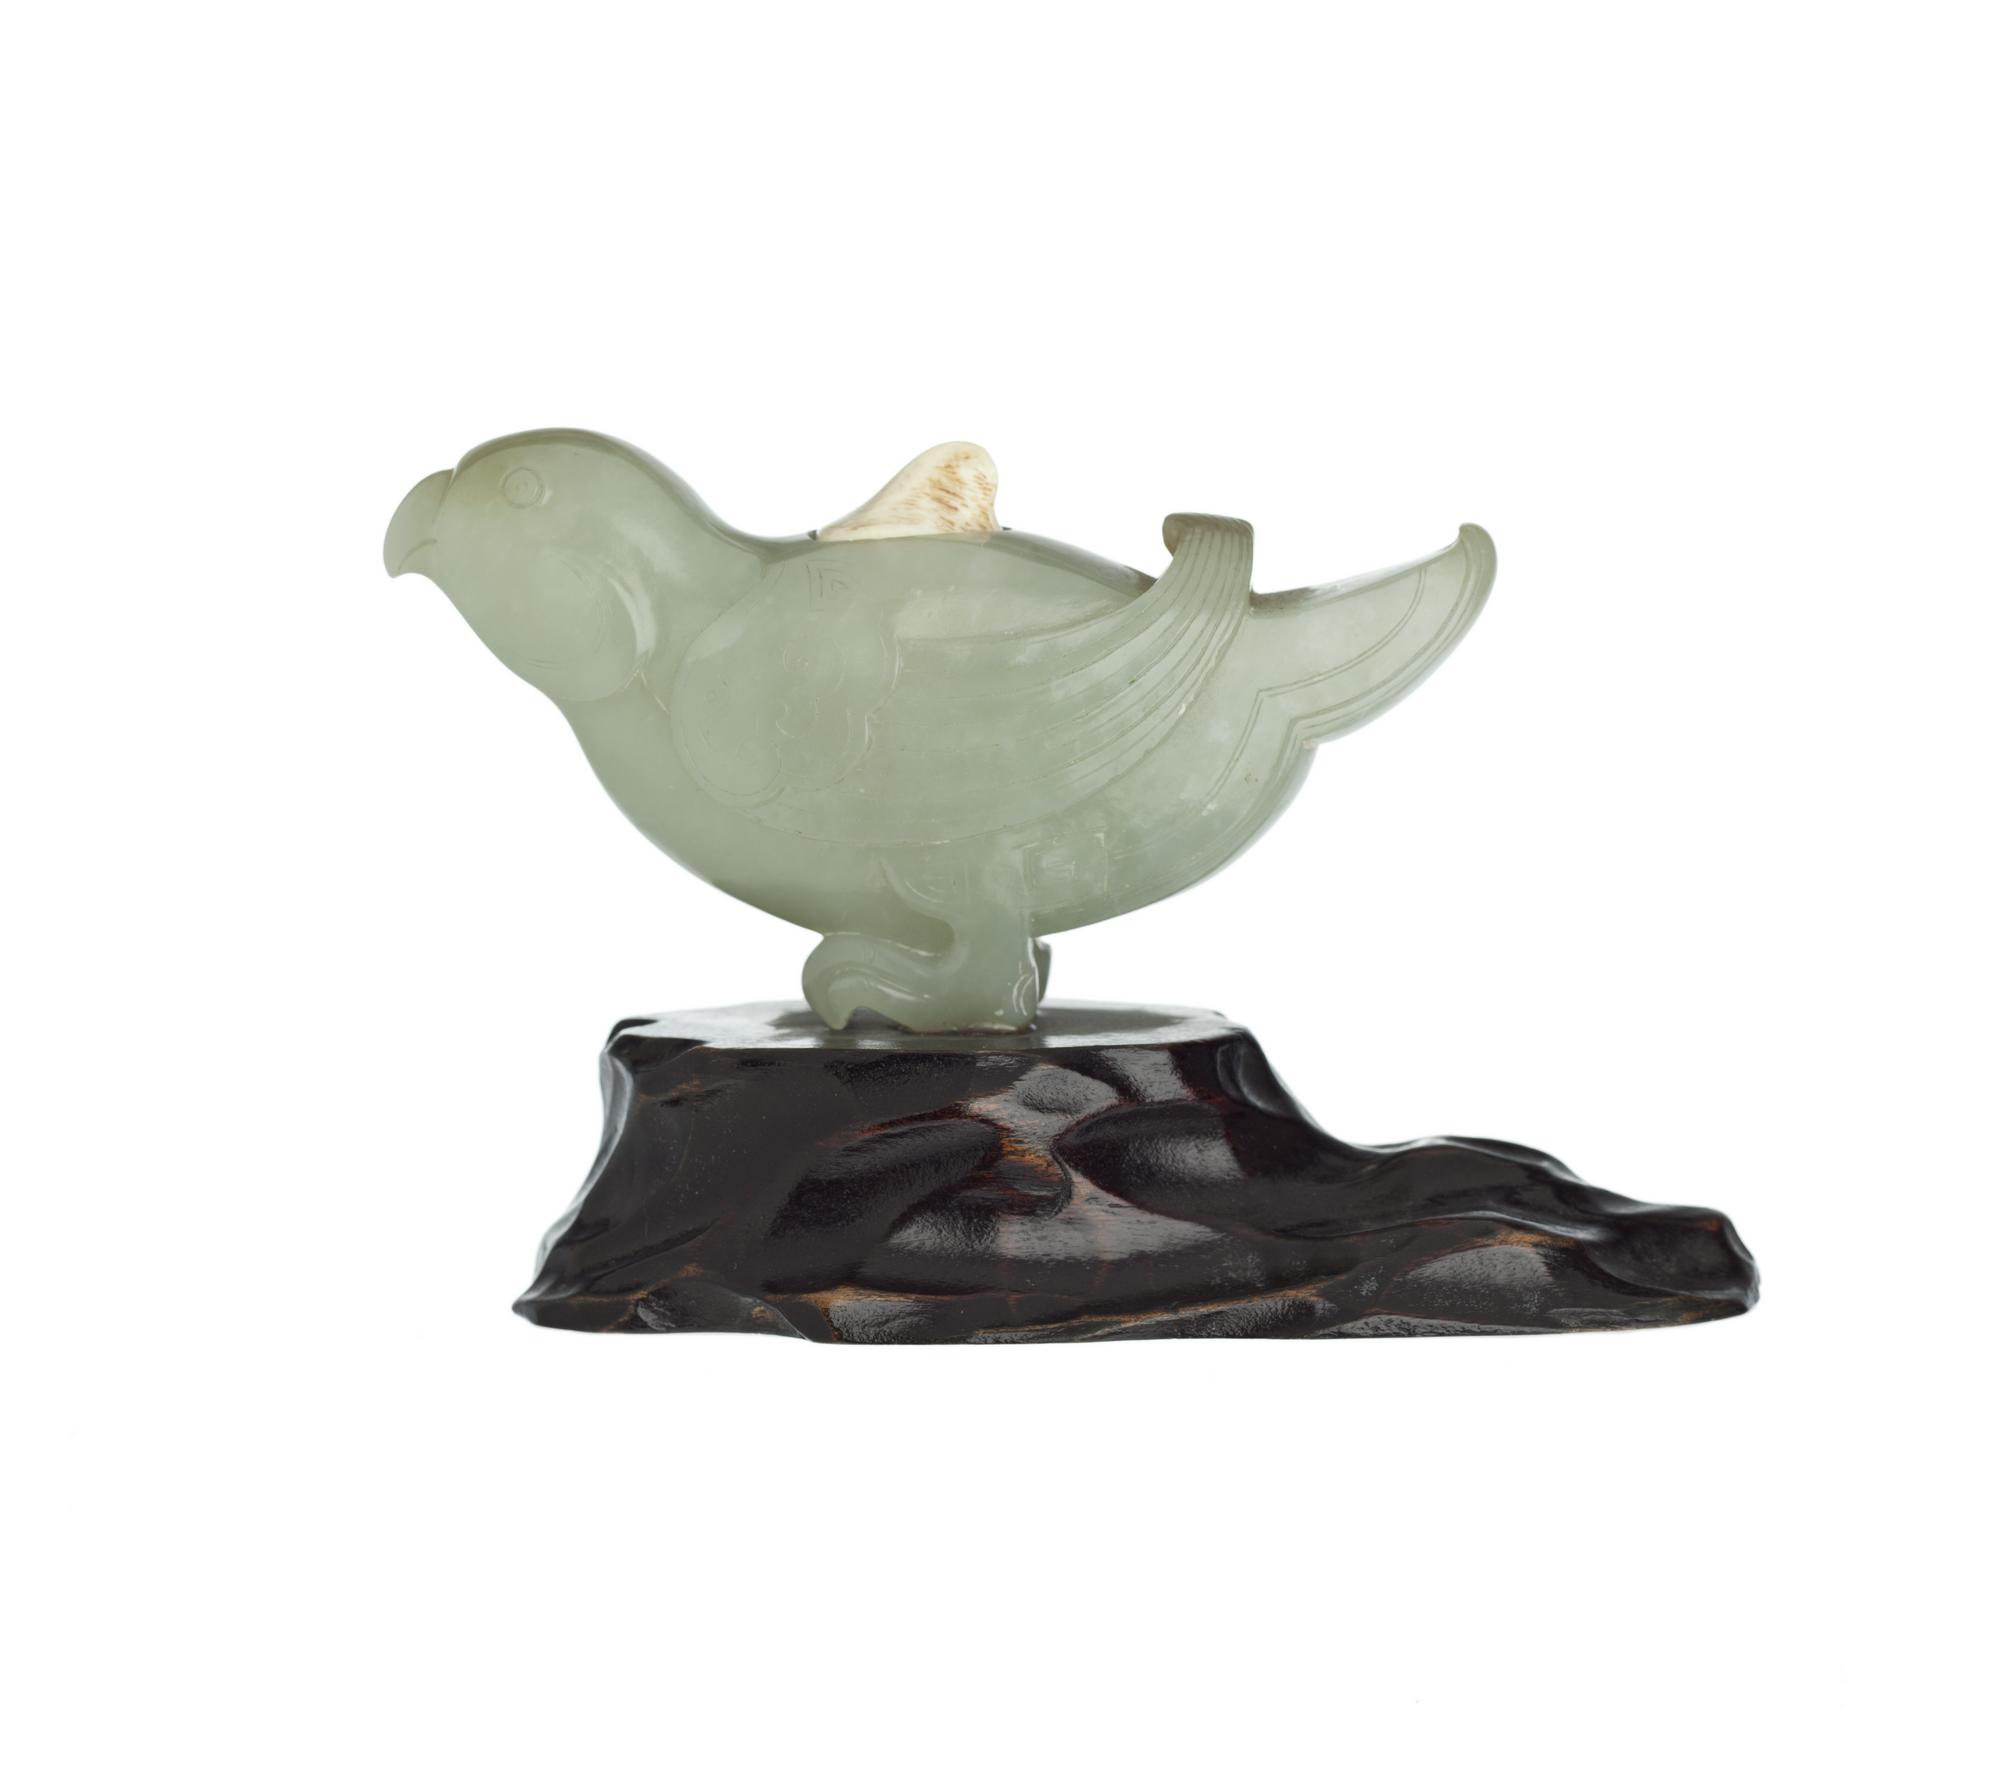 Jade container in the shape of a parakeet: China, 19th century.